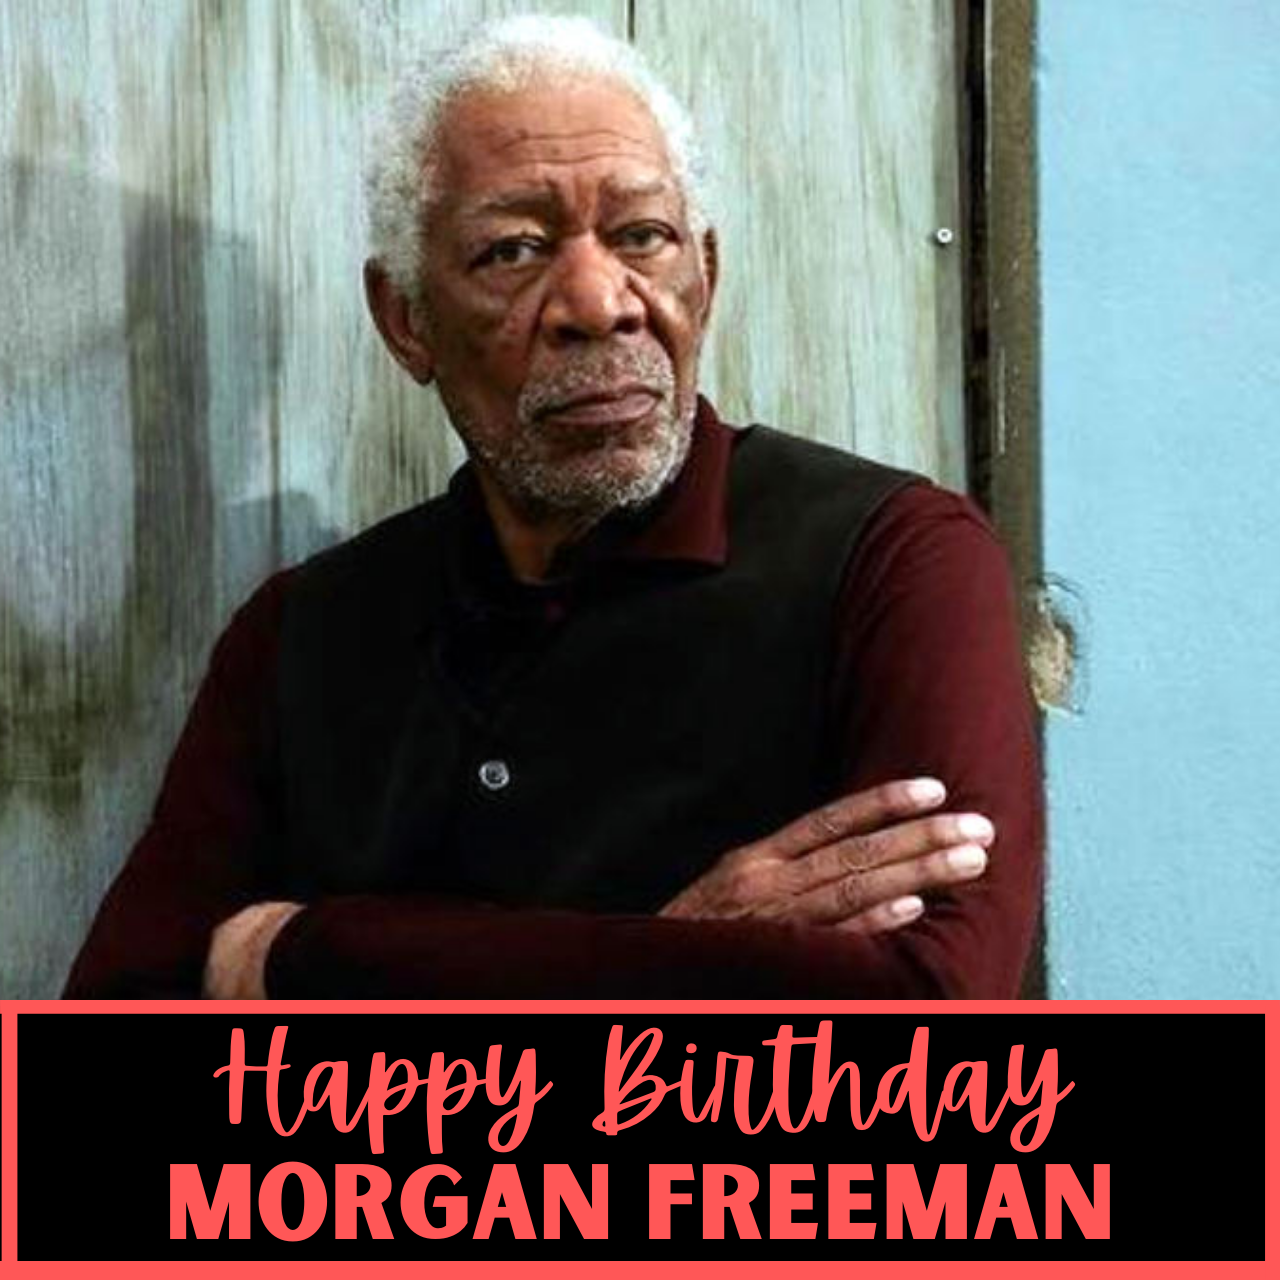 Happy Birthday Morgan Freeman: Top Quotes from the Morgan That Will Inspire You